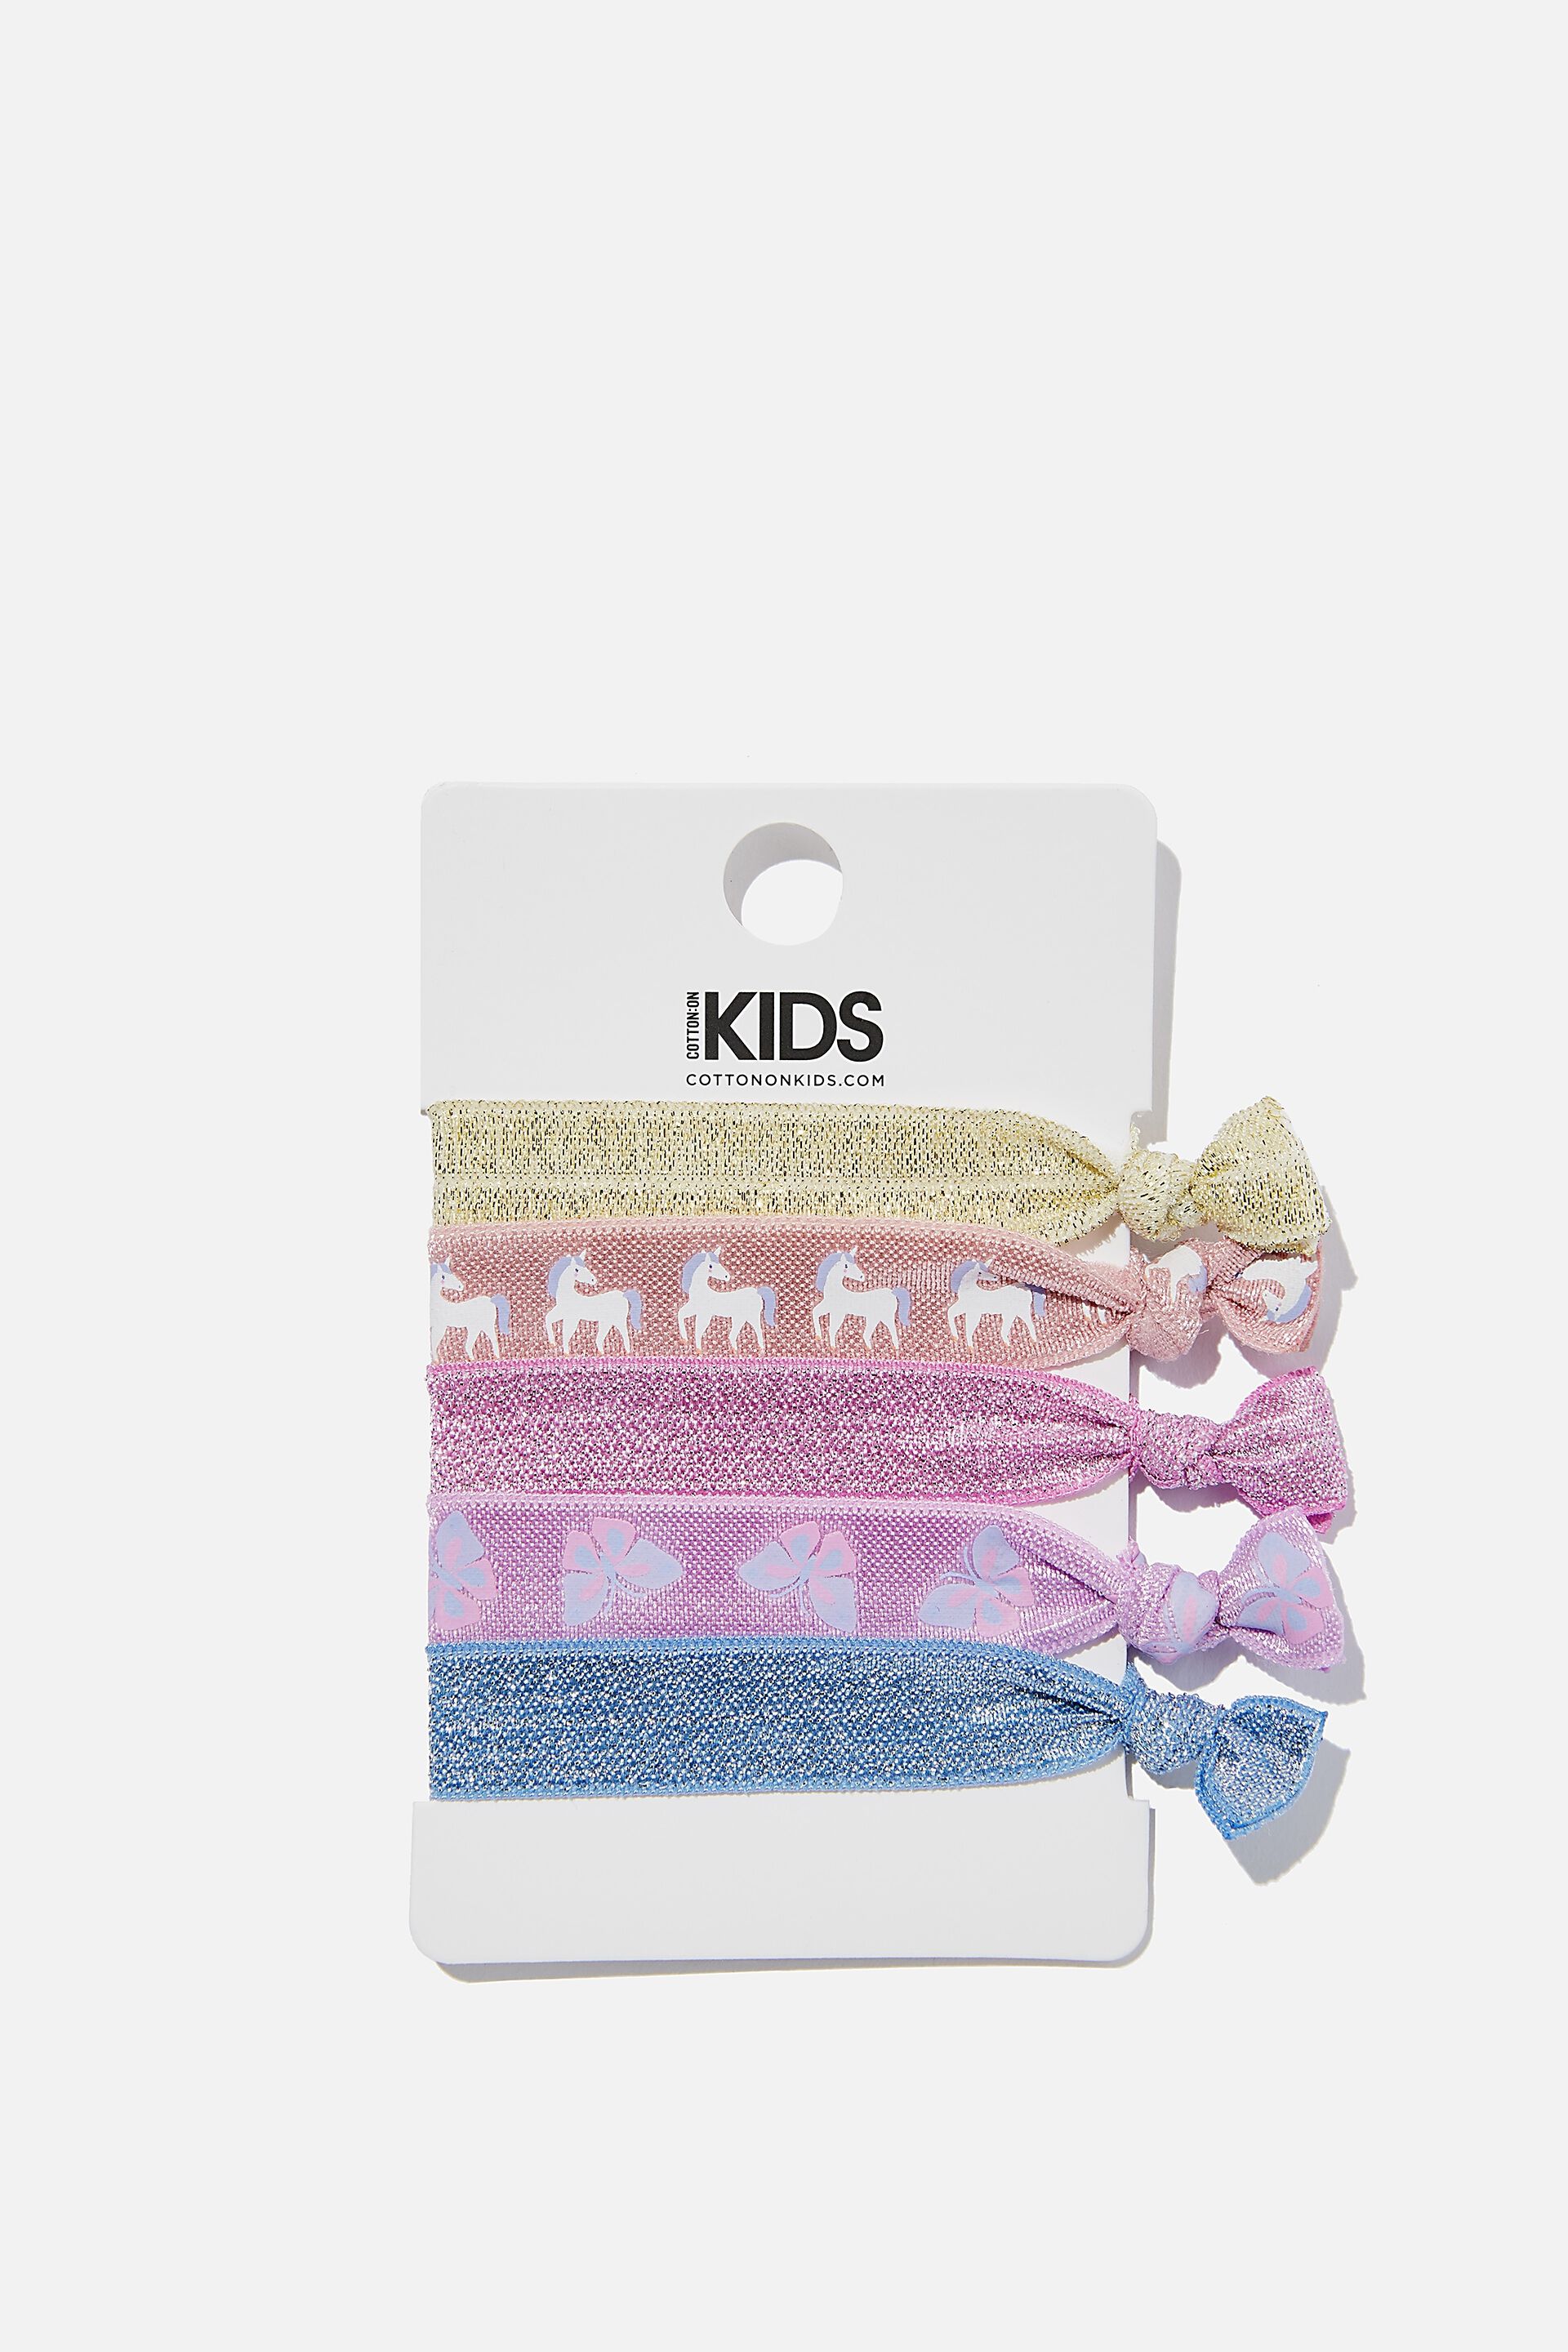 Shoes & Accessories Hair Accessories | Knot Messy Hair Ties - PE85555